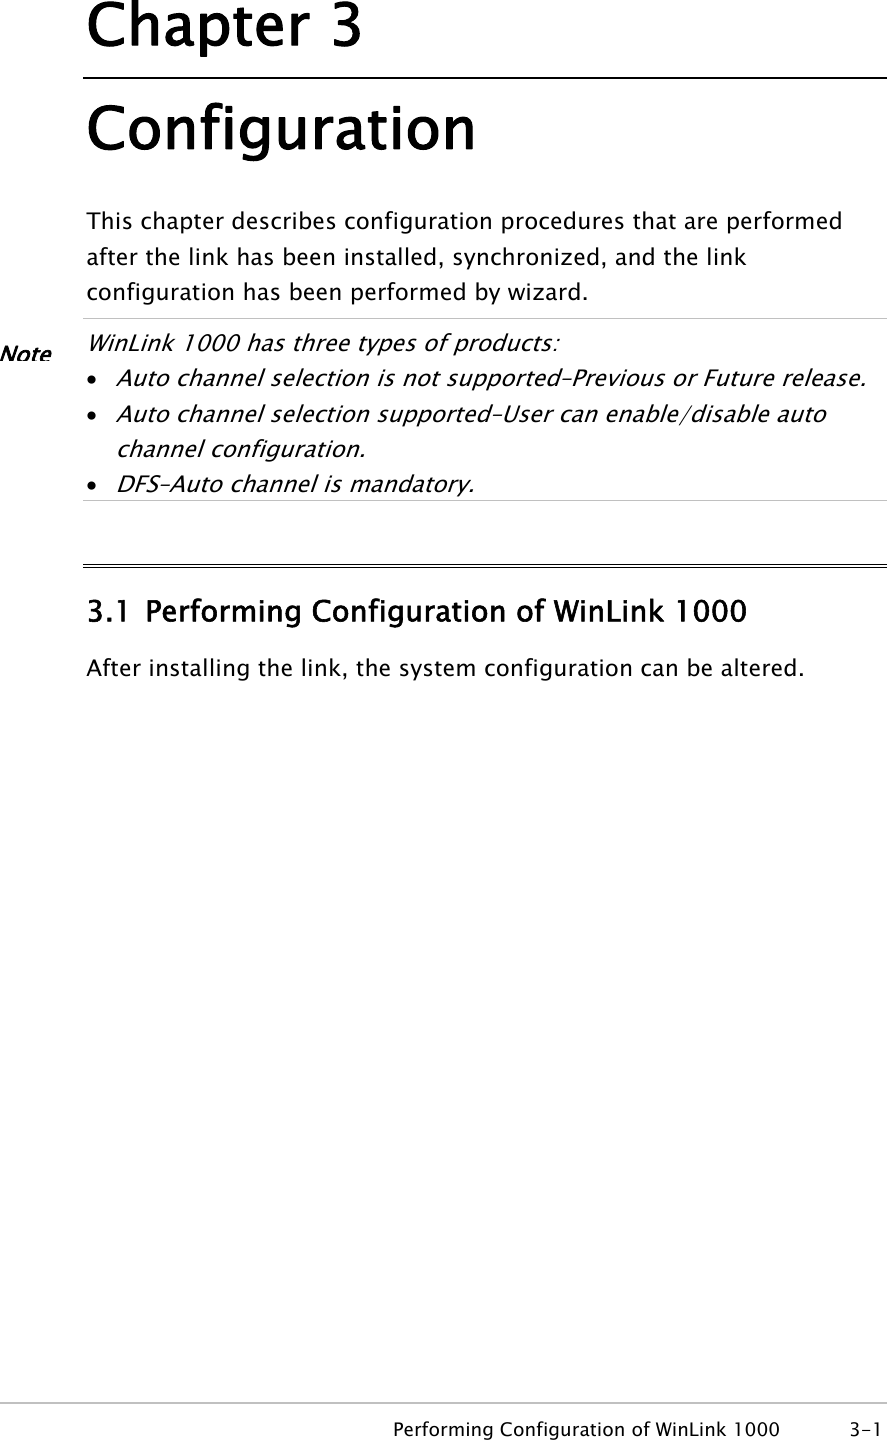 Chapter 3 Configuration This chapter describes configuration procedures that are performed after the link has been installed, synchronized, and the link configuration has been performed by wizard.  WinLink 1000 has three types of products: Note• Auto channel selection is not supported–Previous or Future release. • Auto channel selection supported–User can enable/disable auto channel configuration. • DFS–Auto channel is mandatory.  3.1 Performing Configuration of WinLink 1000 After installing the link, the system configuration can be altered.   Performing Configuration of WinLink 1000  3-1 